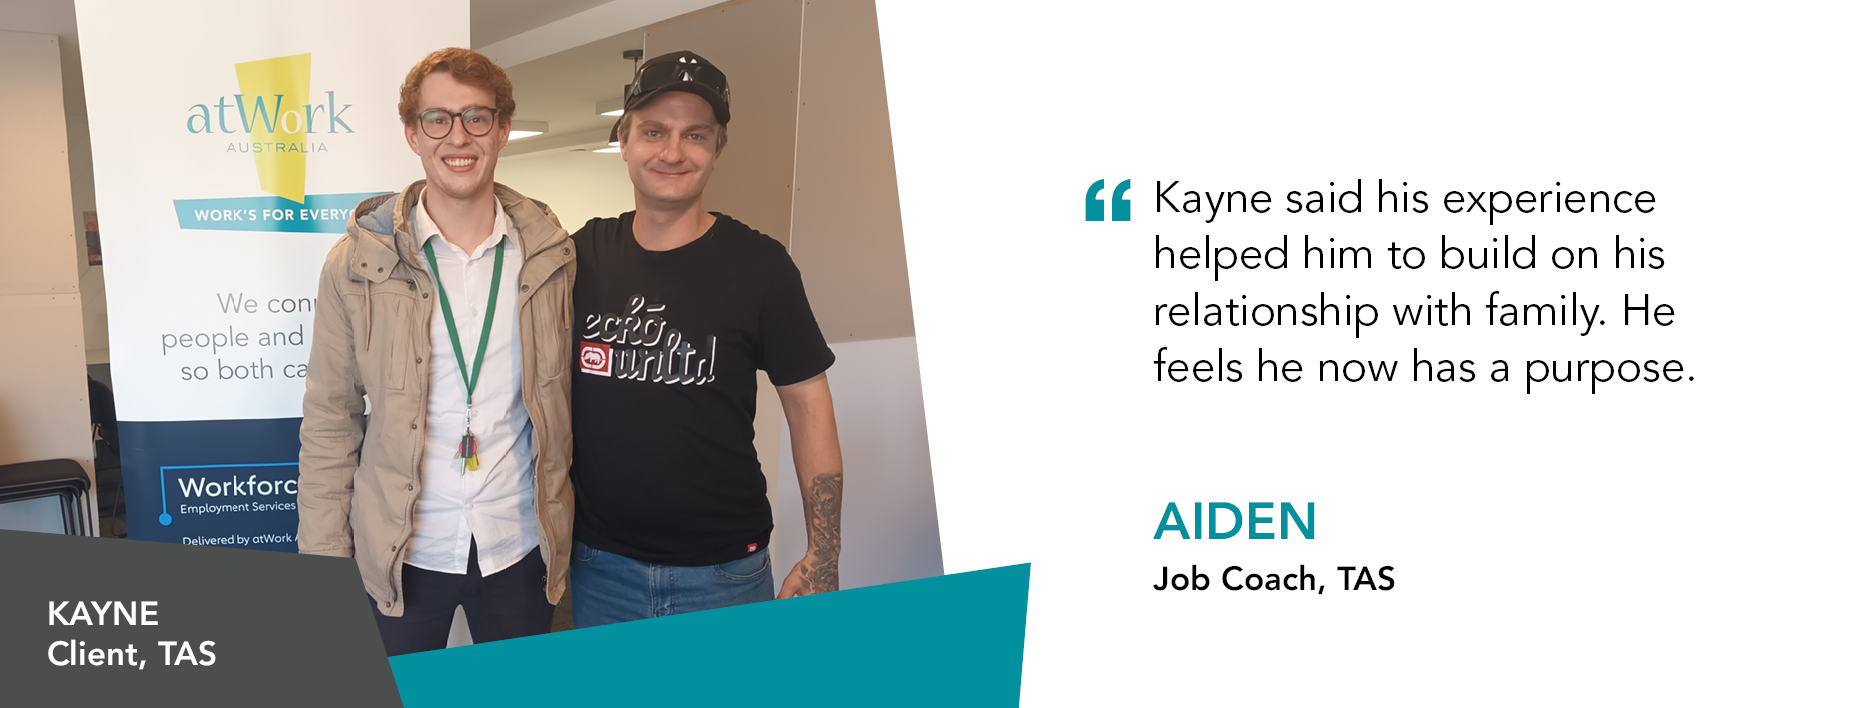 Quote reads "Kayne said his experience helped him to build on his relationship with family. He feels he now has a purpose." said Aiden Job Coach from Tasmania